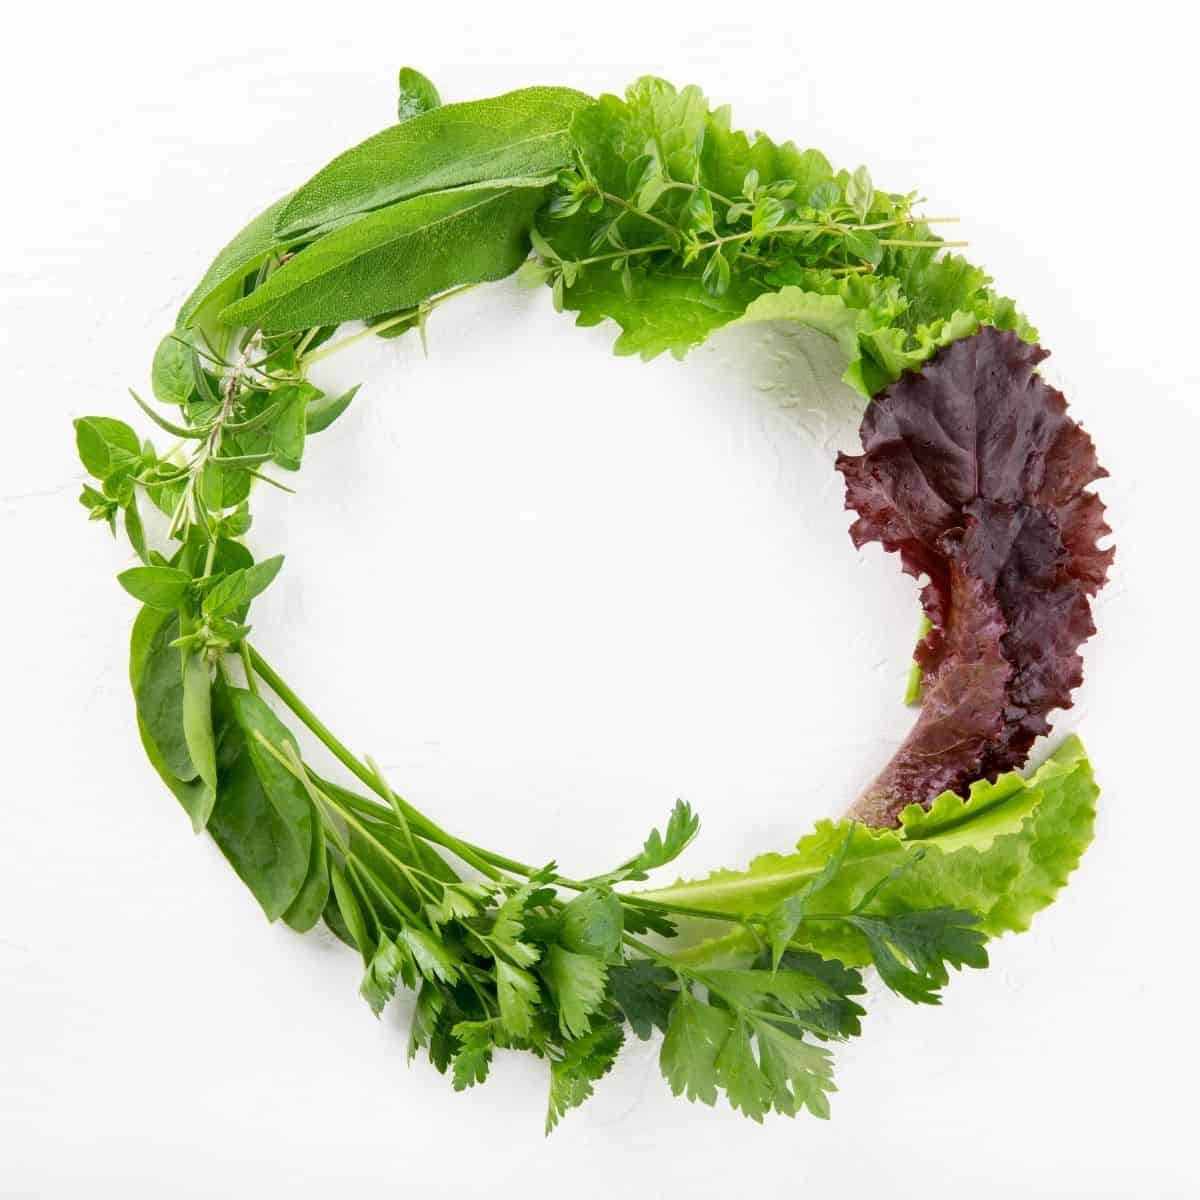 A circle of green lettuce and herbs.